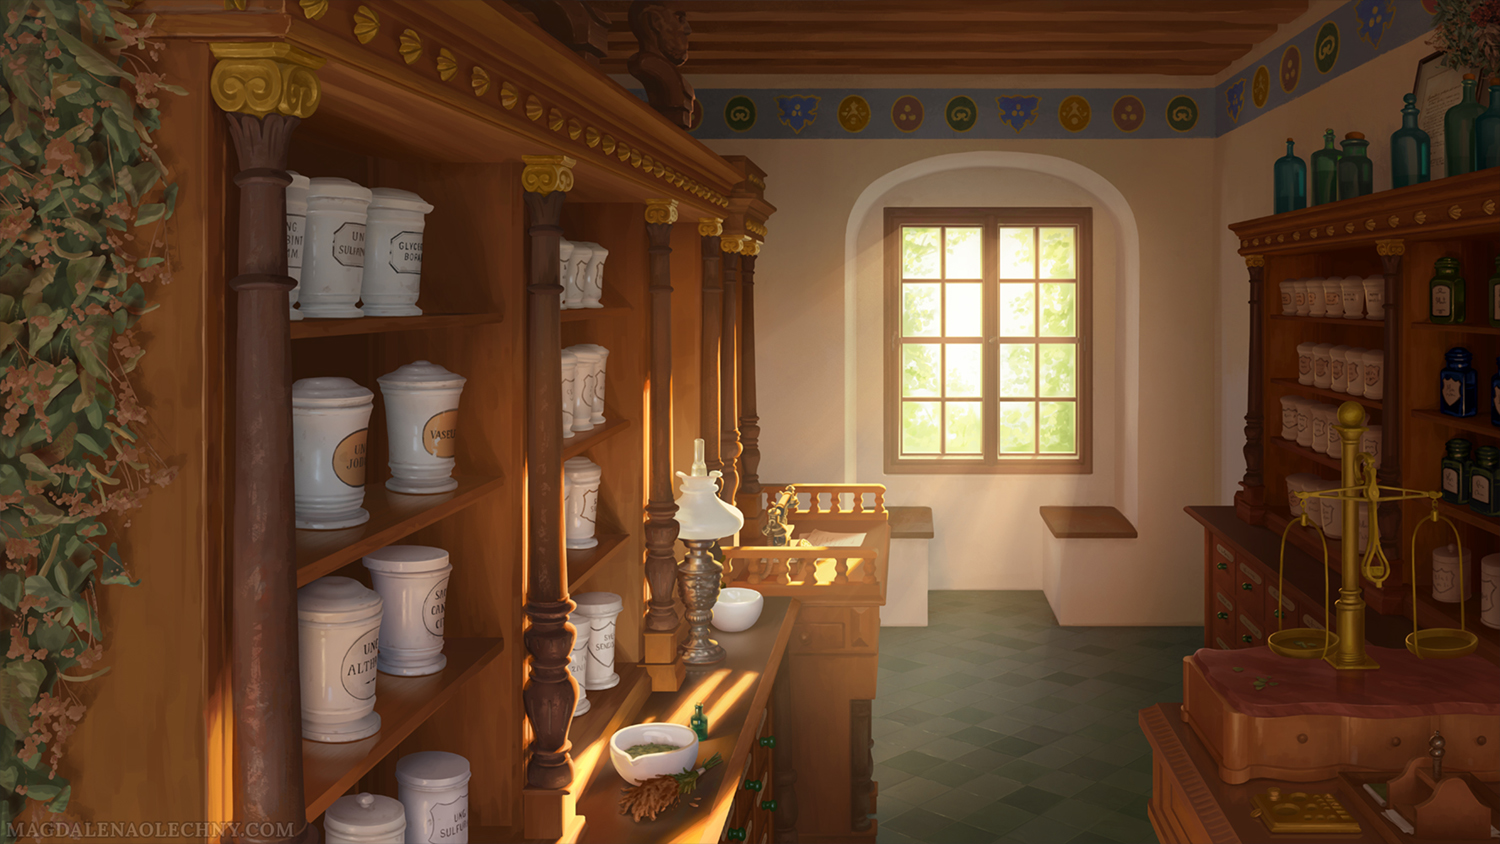 A digital illustration depicting the XIX-century pharmacy. Wooden cabinets are full of ceramic jars and glass bottles. On the side of one of the racks, there are some dried herbs hung upside down. There is a small ceramic mortar and pestle with some herbs on one counter, as well as a phone on another. On a wooden desk, there are marble-topped scales, some coins, and papers. In the background, a window is letting in morning sunlight.